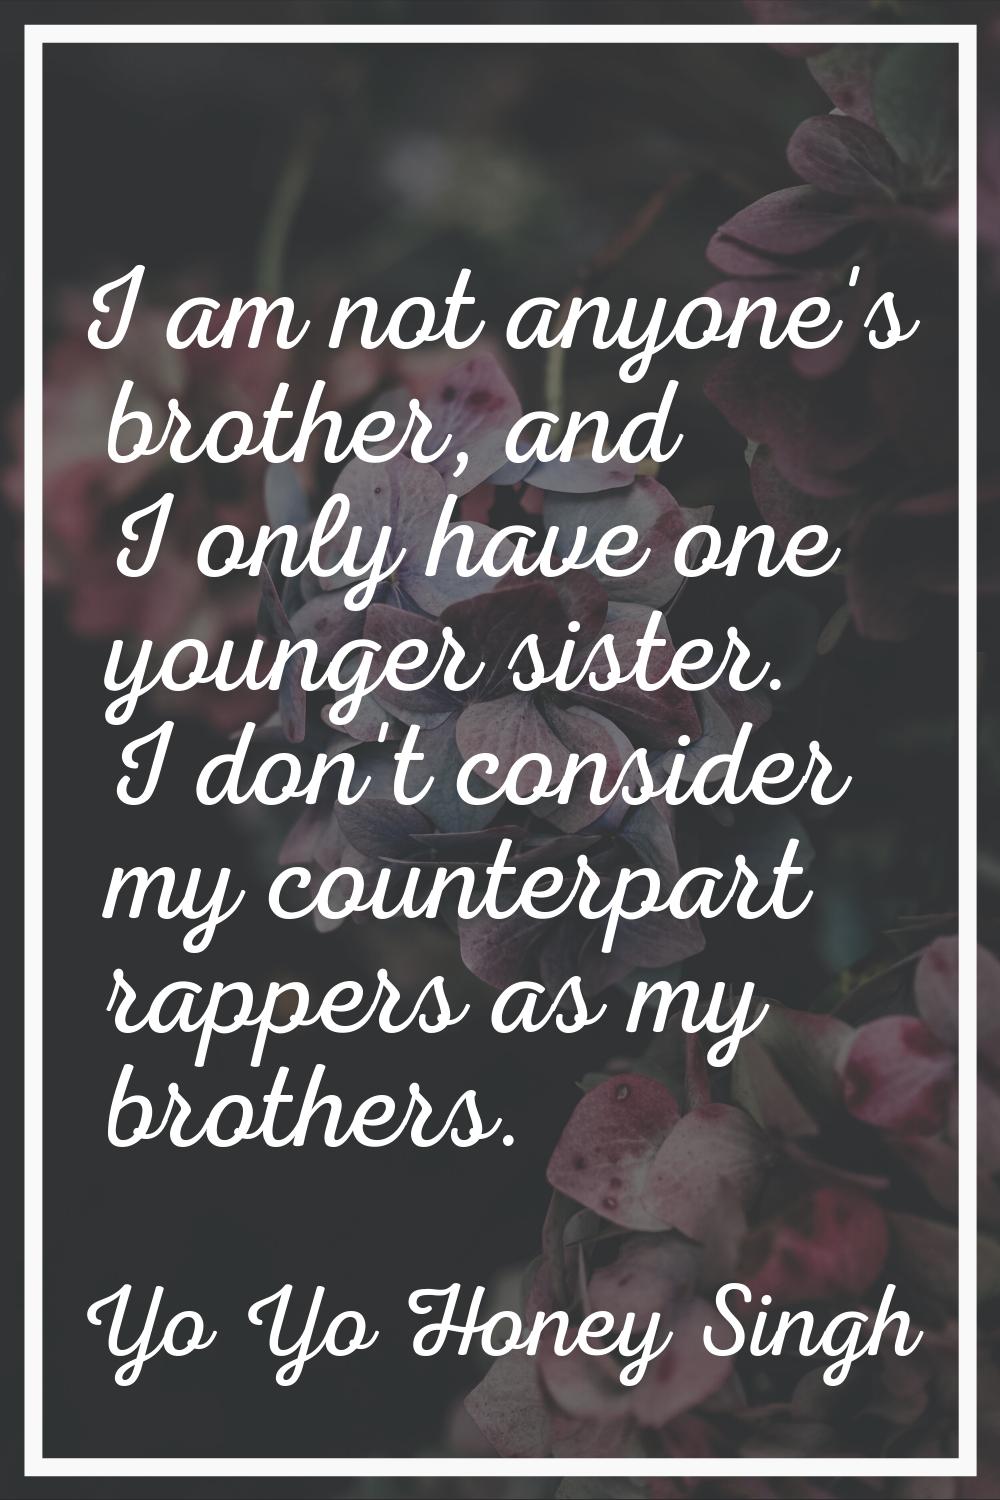 I am not anyone's brother, and I only have one younger sister. I don't consider my counterpart rapp